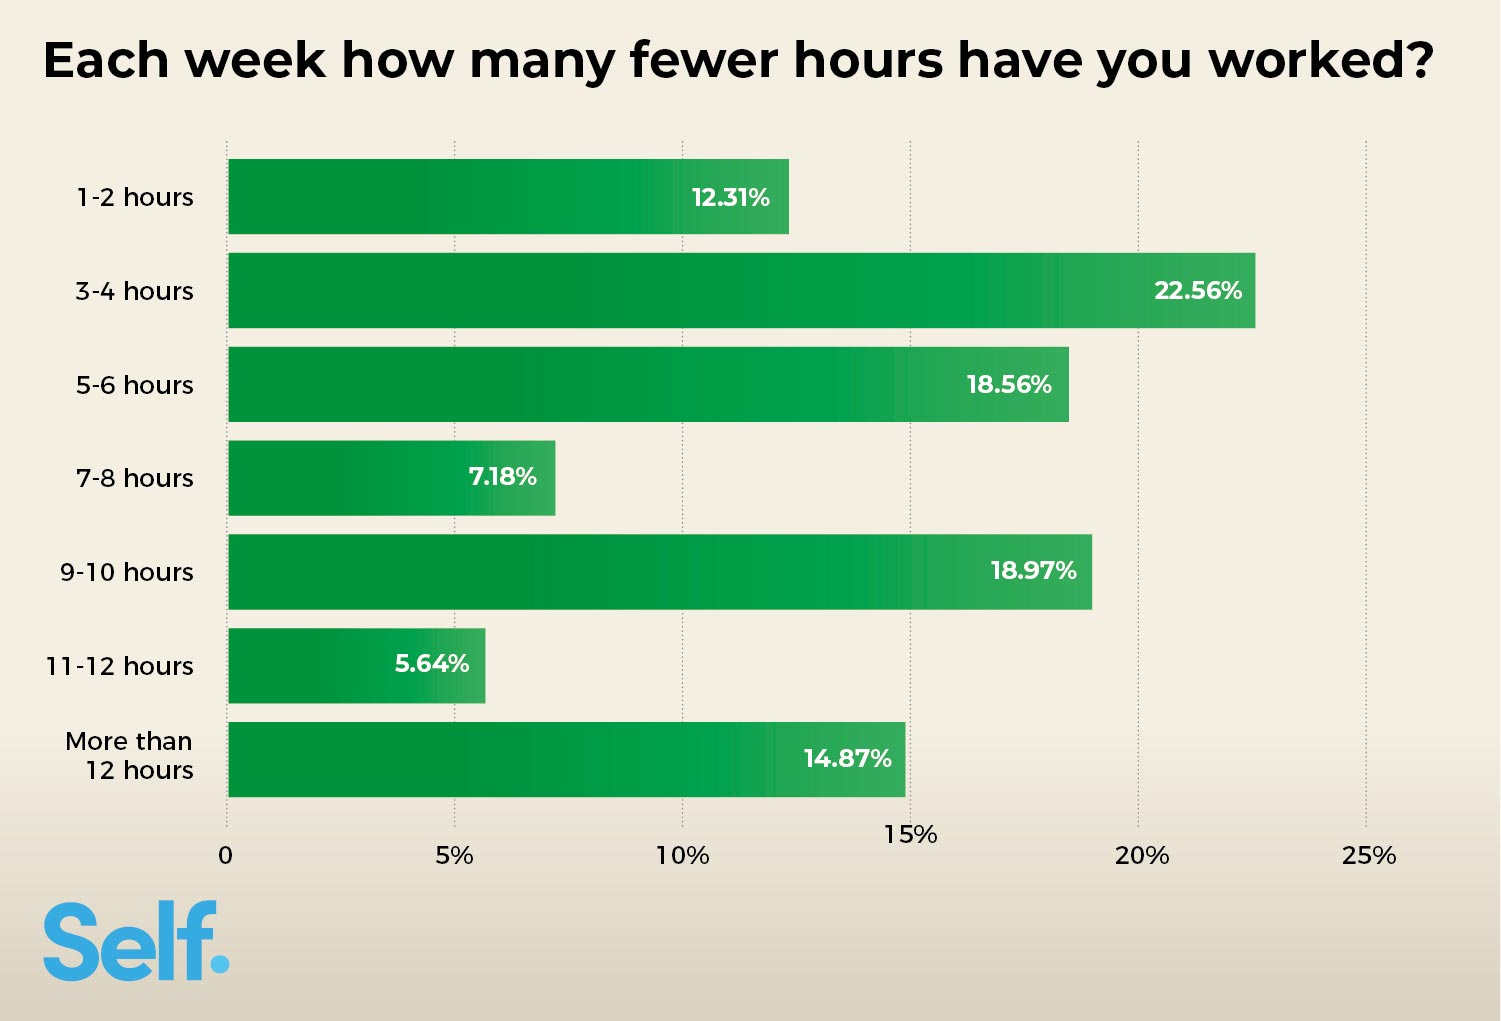 Each week how many fewer hours have you worked?